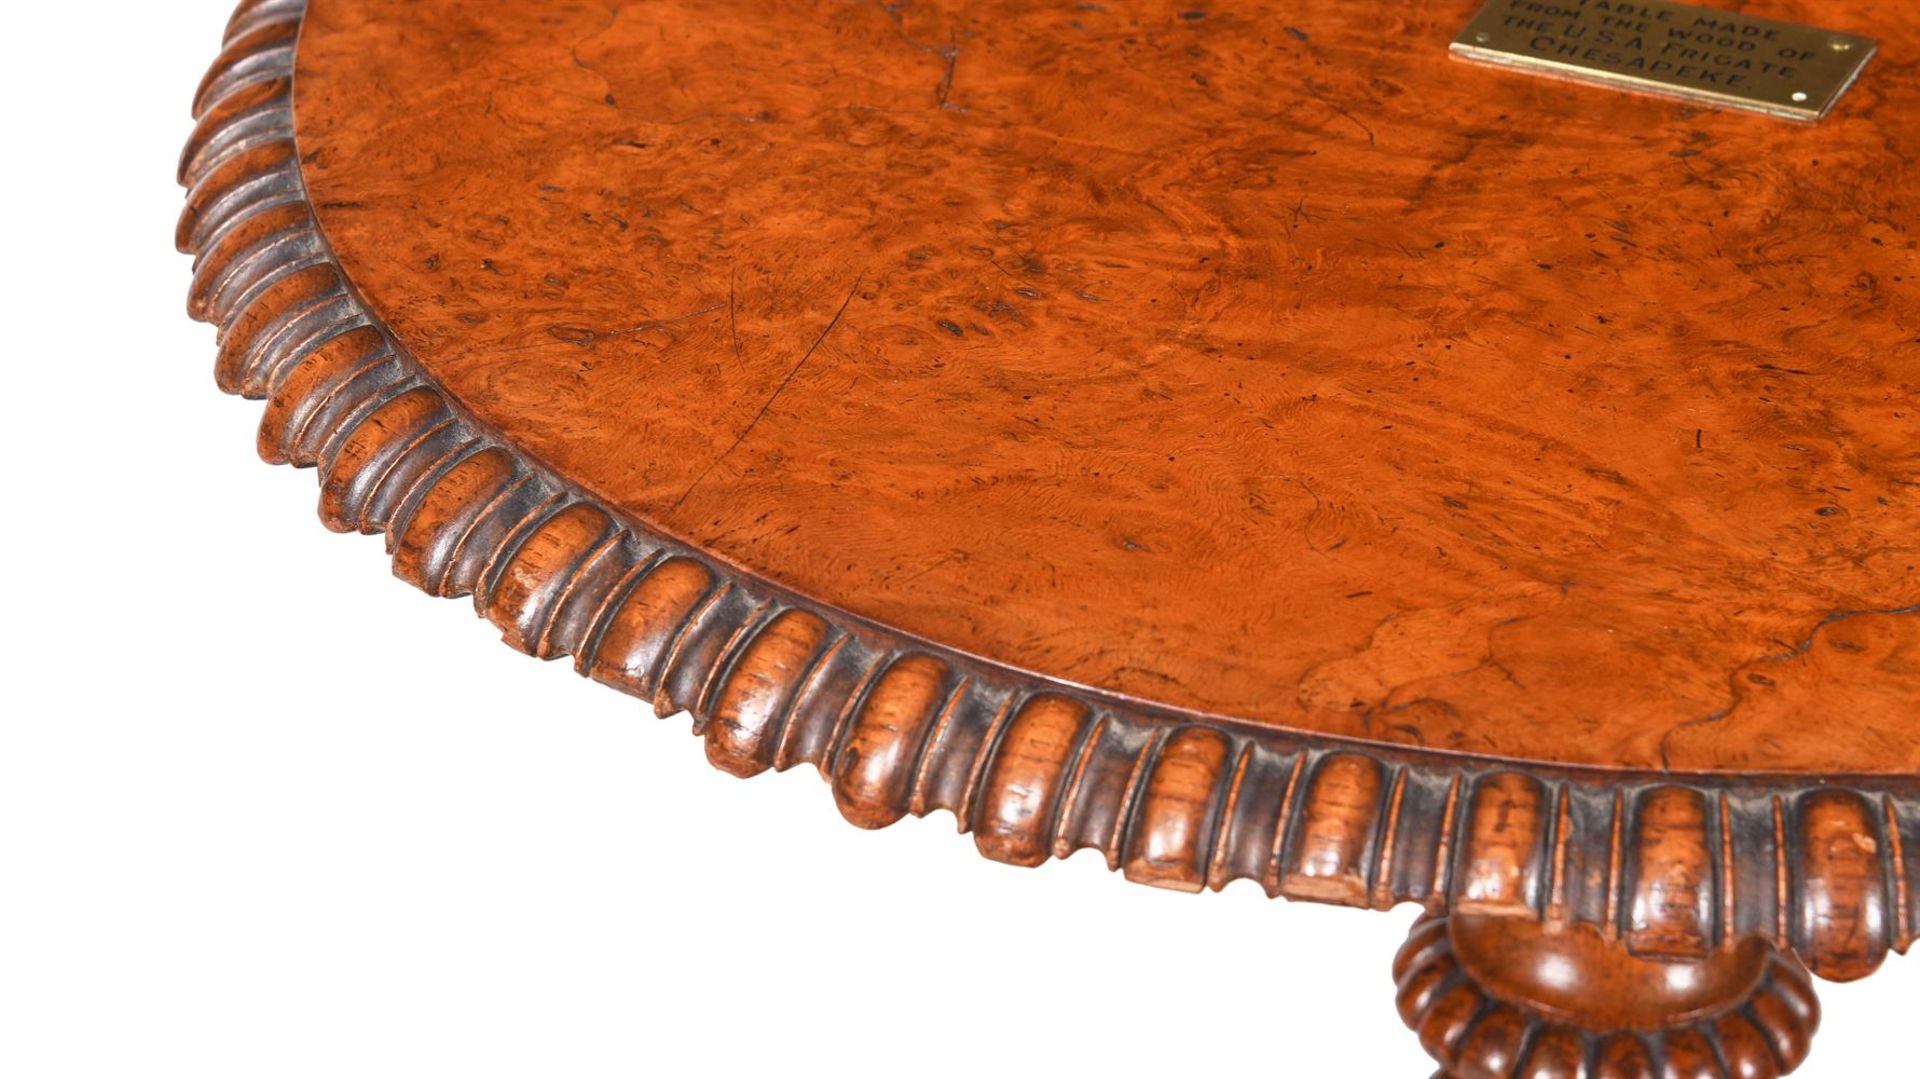 A VICTORIAN POLLARD OAK TRIPOD TABLE, ATTRIBUTED TO GILLOWS, SECOND QUARTER 19TH CENTURY - Image 4 of 7